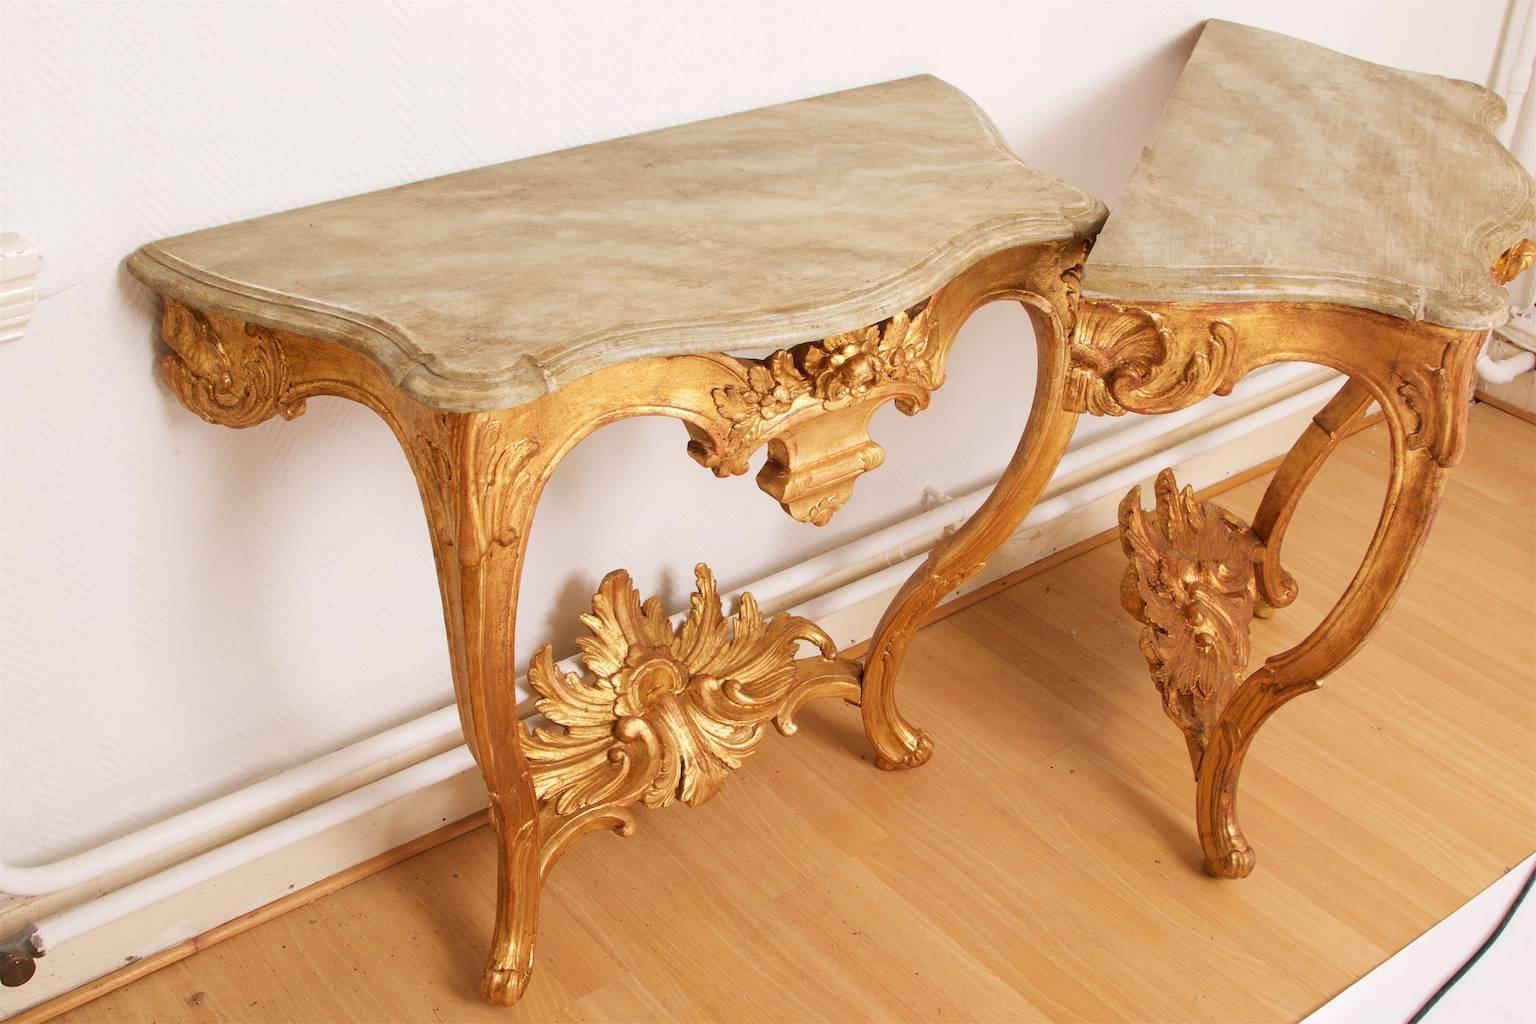 Rococo A Pair of Console Tables, Quite Similar, Stockholm, Sweden Flodins Art, c. 1770 For Sale